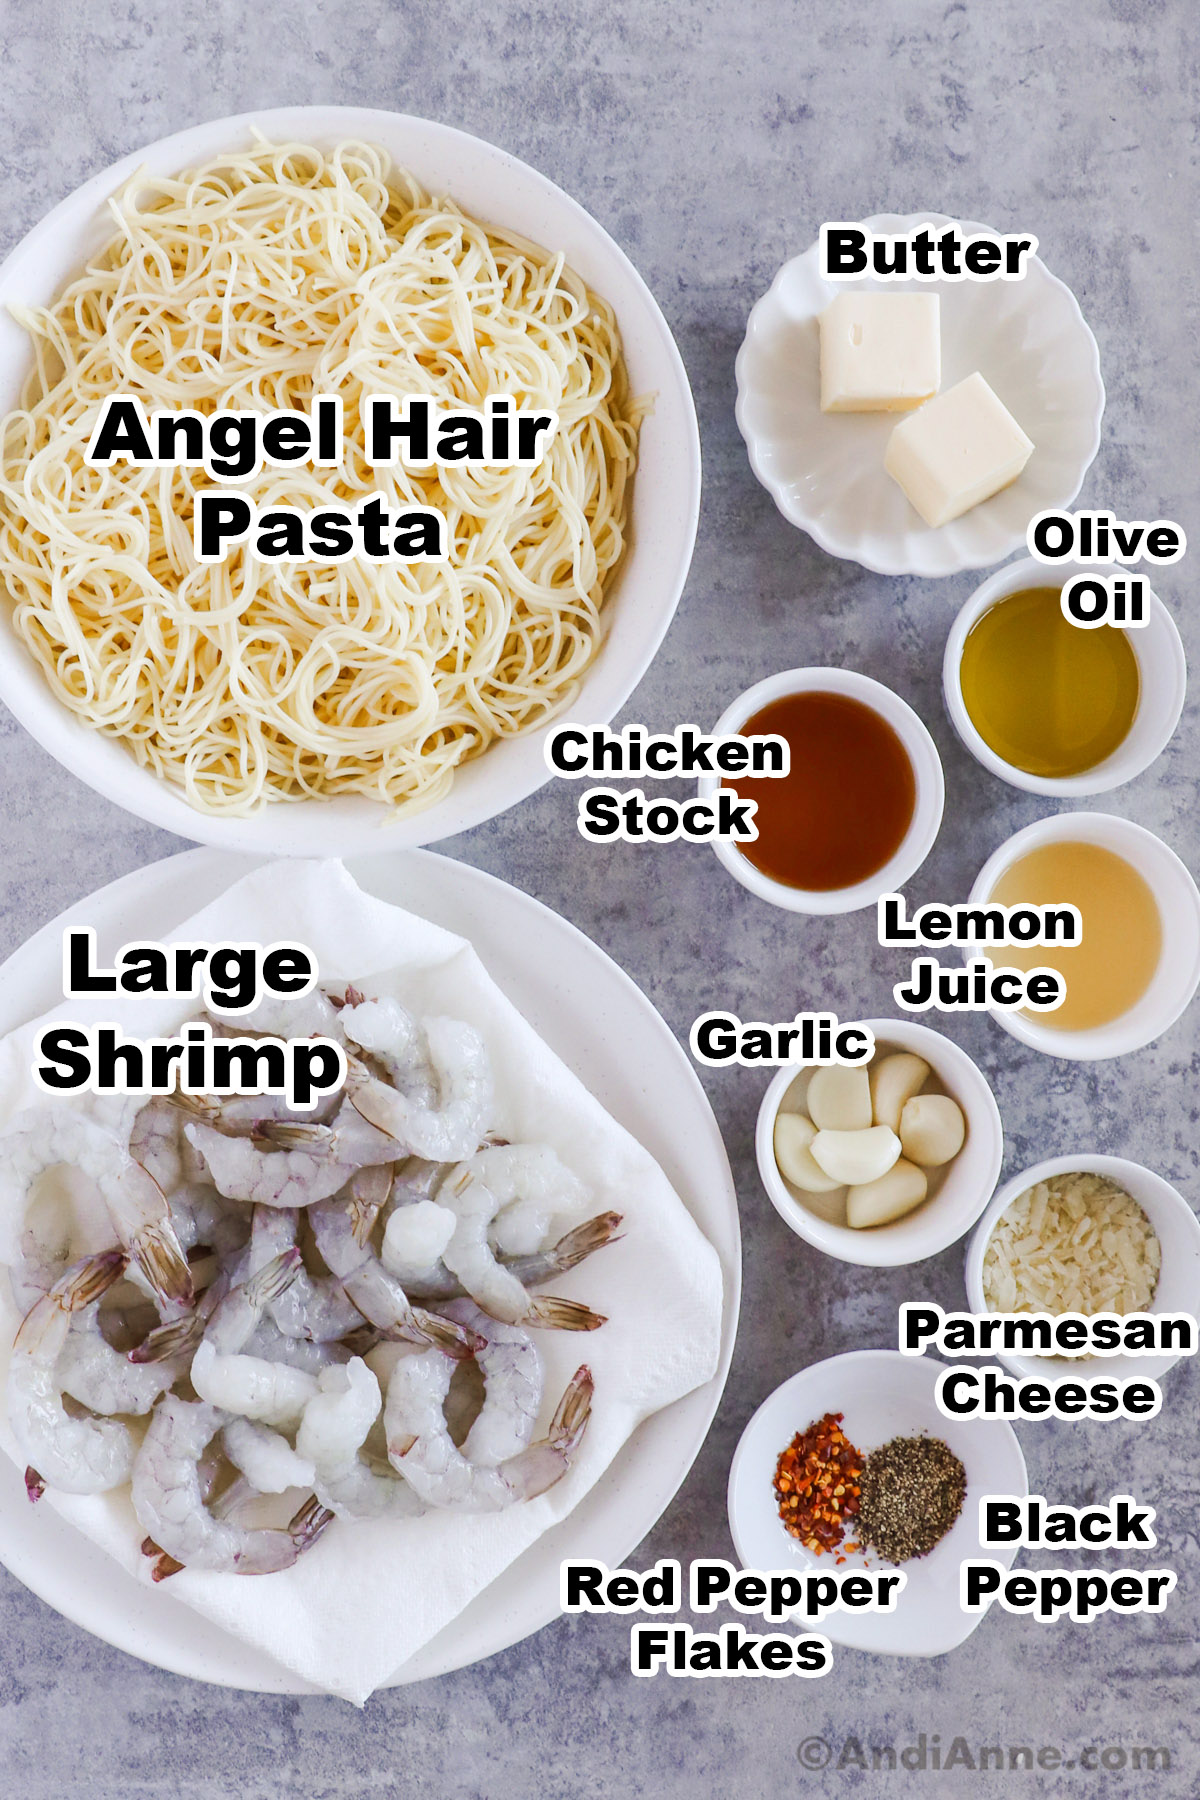 Recipe ingredients in bowls including raw shrimp, cooked angel hair pasta, butter, chicken stock, olive oil, lemon juice, garlic cloves and parmesan cheese.